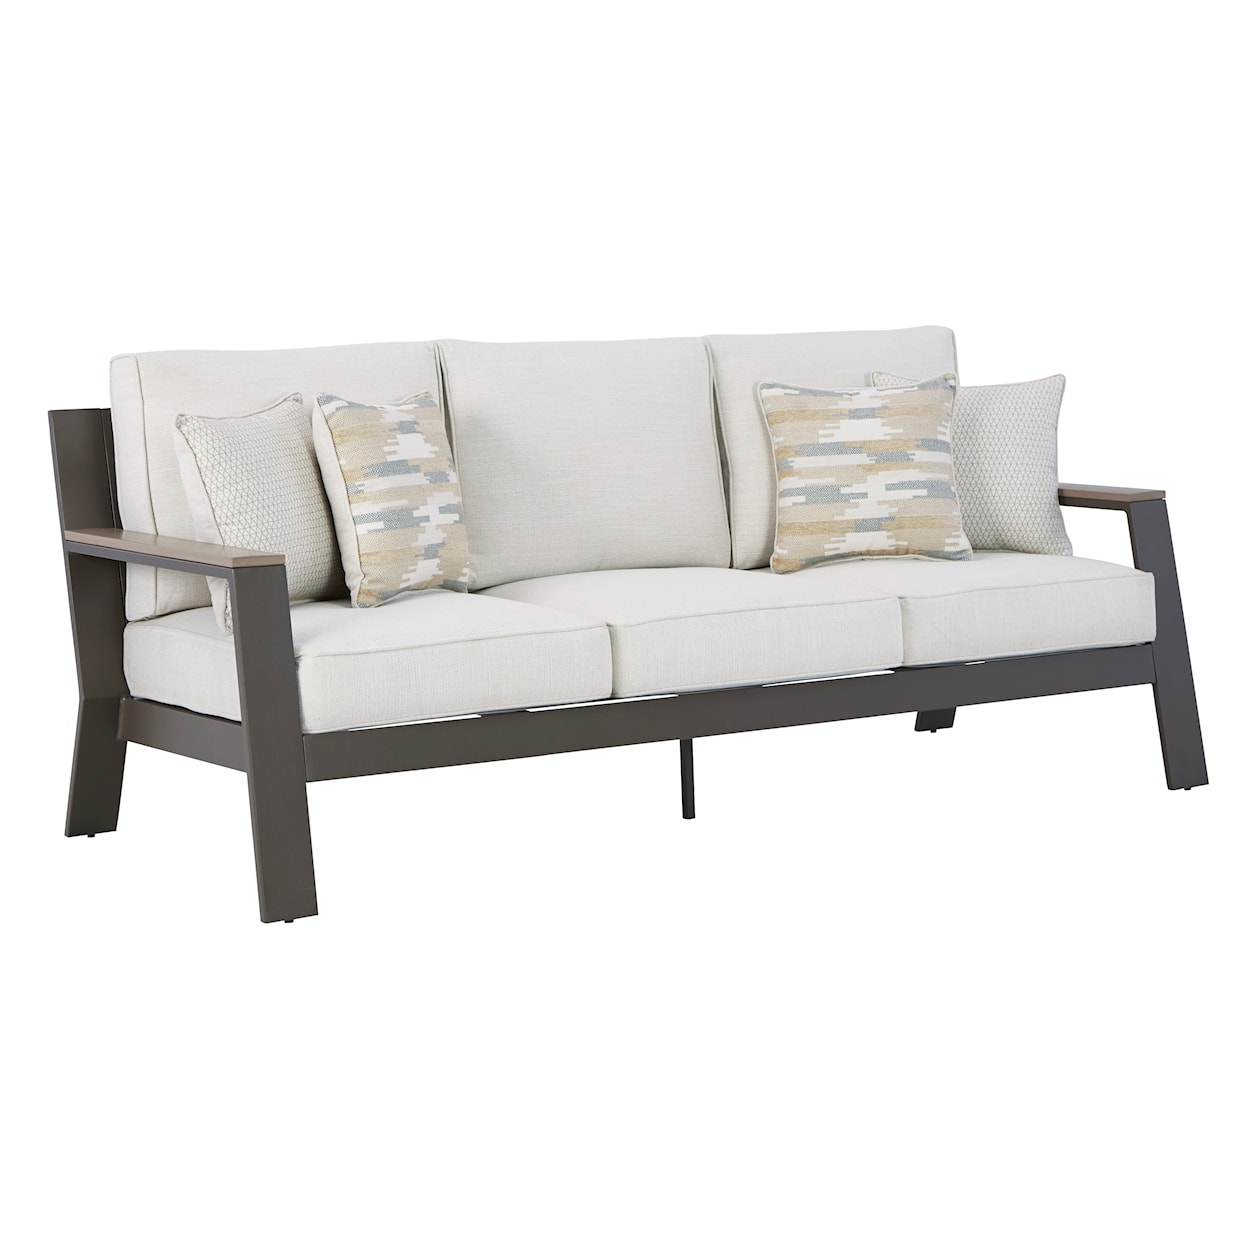 Signature Design by Ashley Tropicava Outdoor Sofa with Cushion